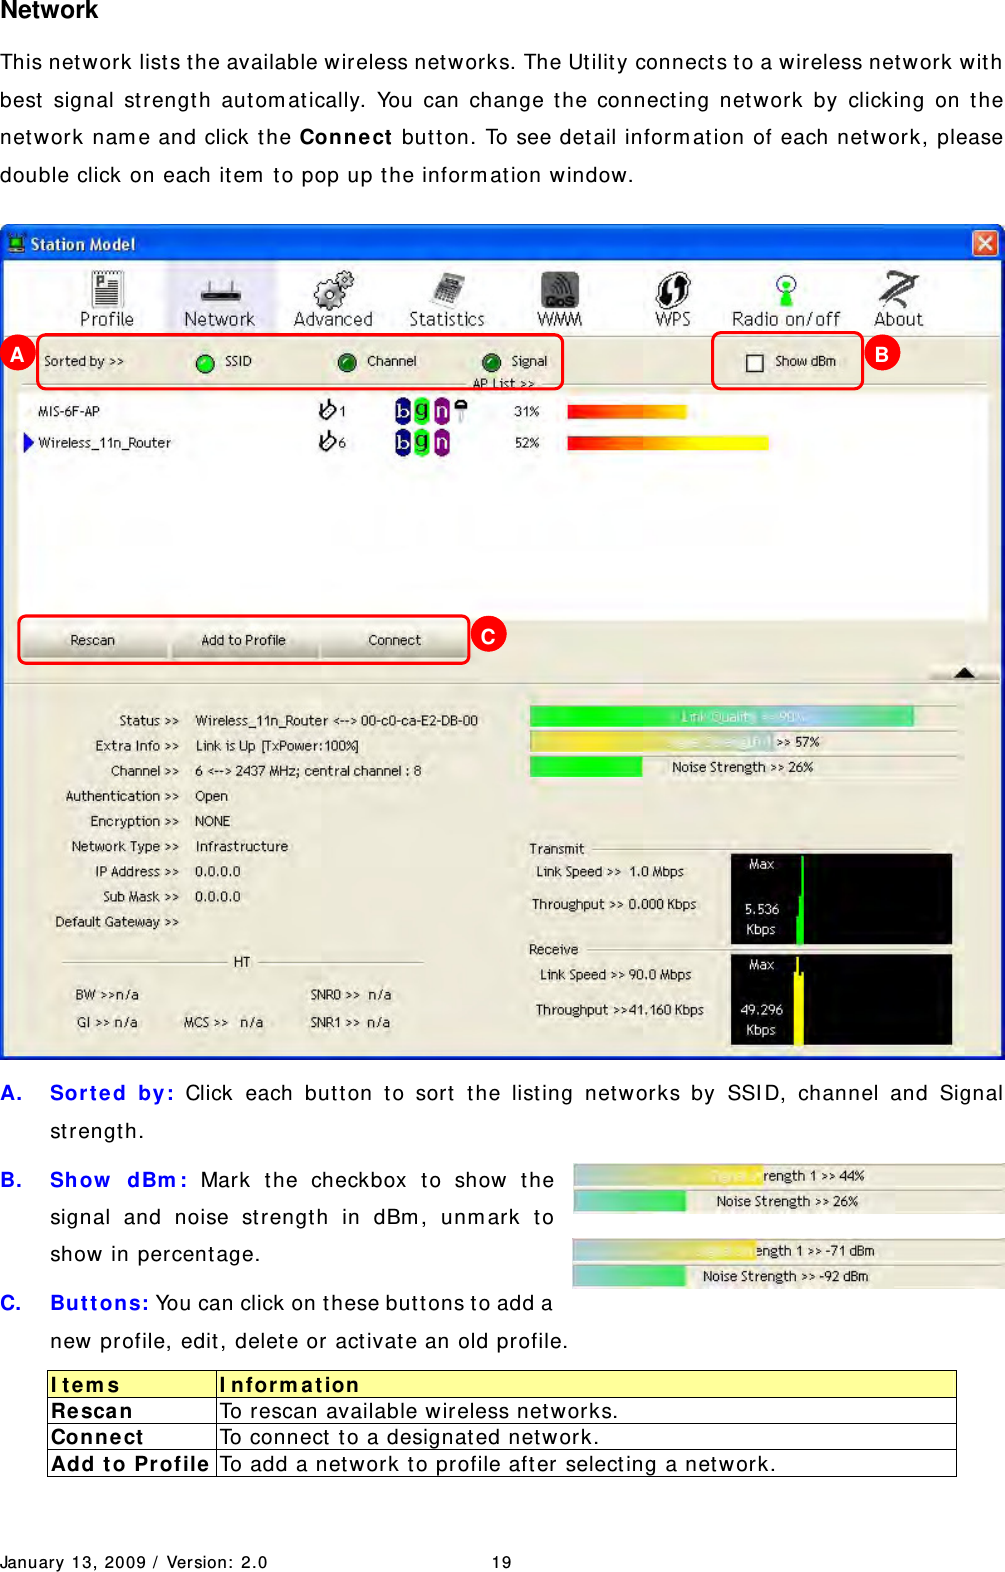 January 13, 2009 /  Ver sion:  2.0 19 Network This network lists the available wireless net w orks. The Ut ilit y connects t o a wireless net w ork with best  signal st rengt h aut om at ically. You can change t he connecting network by clicking on the net work nam e and click t he Con ne ct  butt on. To see detail inform at ion of each network, please double click on each it em  t o pop up t he inform ation w indow.  A. Sort e d by: Click each butt on t o sort t he list ing net w orks by SSI D, channel and Signal st rengt h. B. Show  dBm : Mark t he checkbox t o show the signal and noise st rengt h in dBm , unm ark to show in percentage.   C.  But t ons: You can click on t hese but tons t o add a new profile, edit, delet e or activat e an old profile. I tem s  I n for m a t ion Re sca n   To rescan available wireless net works. Connect   To connect  t o a designat ed net work. Add t o Pr ofile To add a network to profile aft er selecting a net work. A  B C 